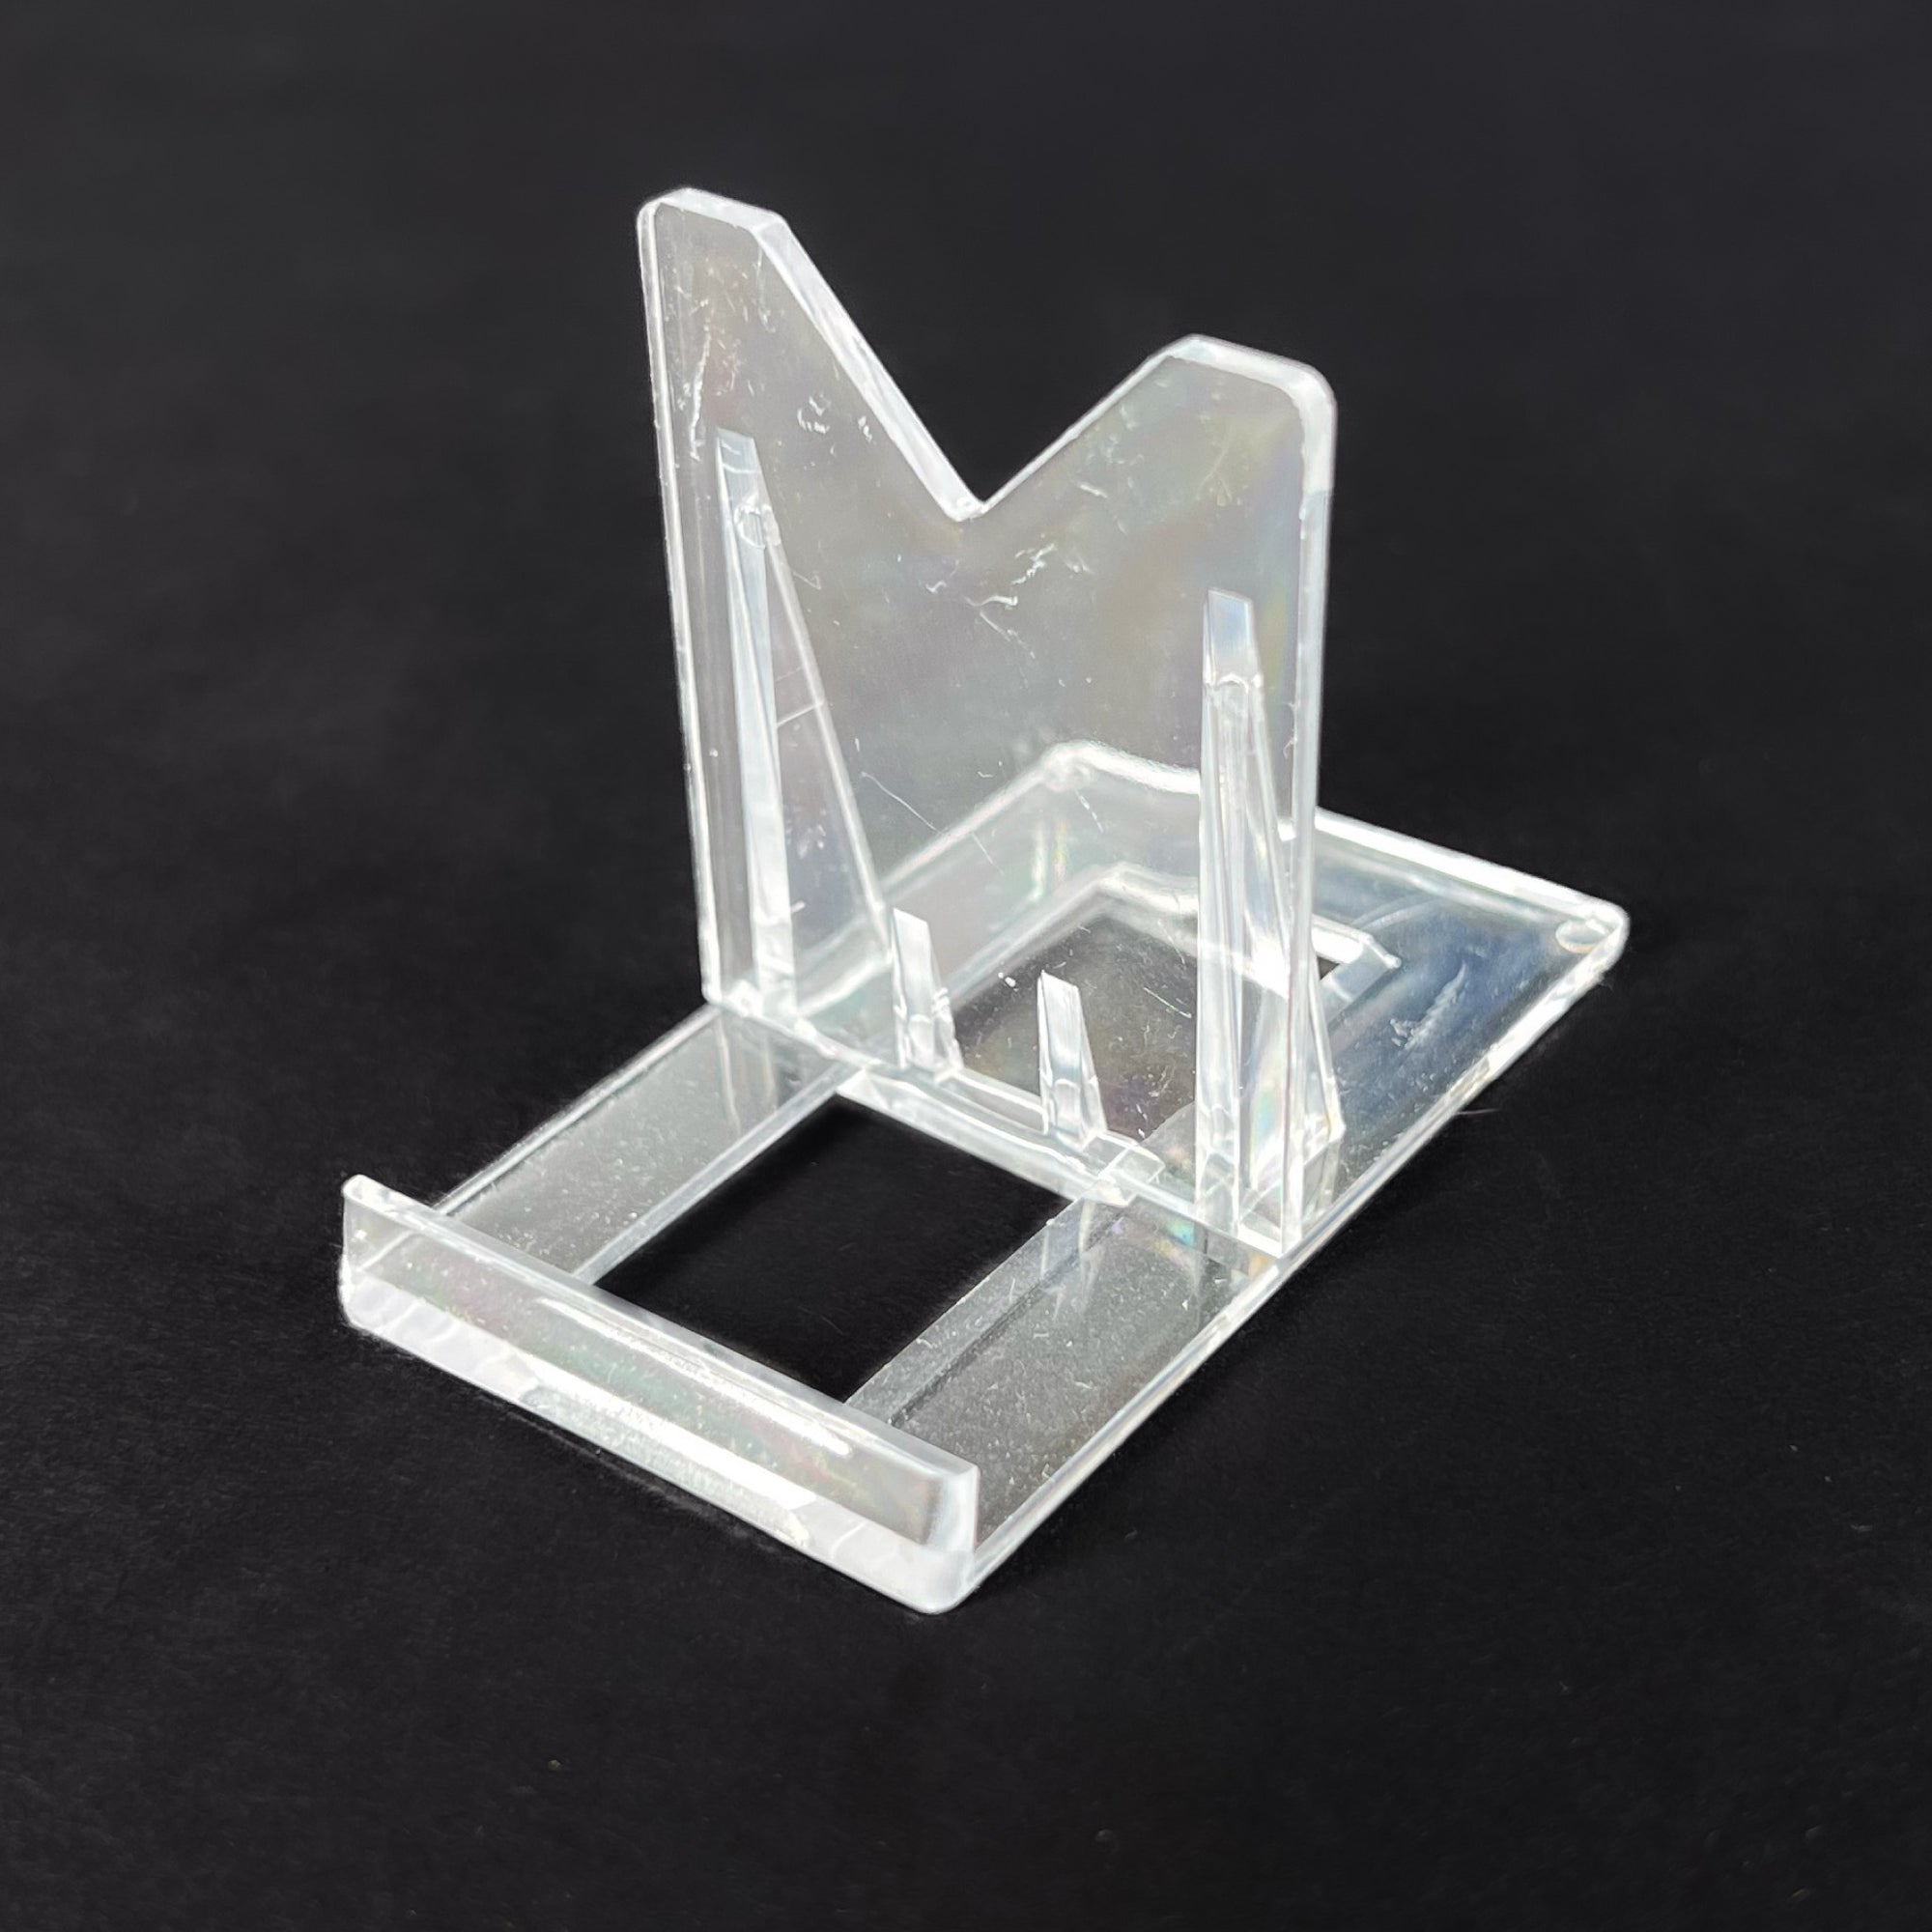 Adjustable 2 part Clear Acrylic Display Stand for Minerals and Fossils